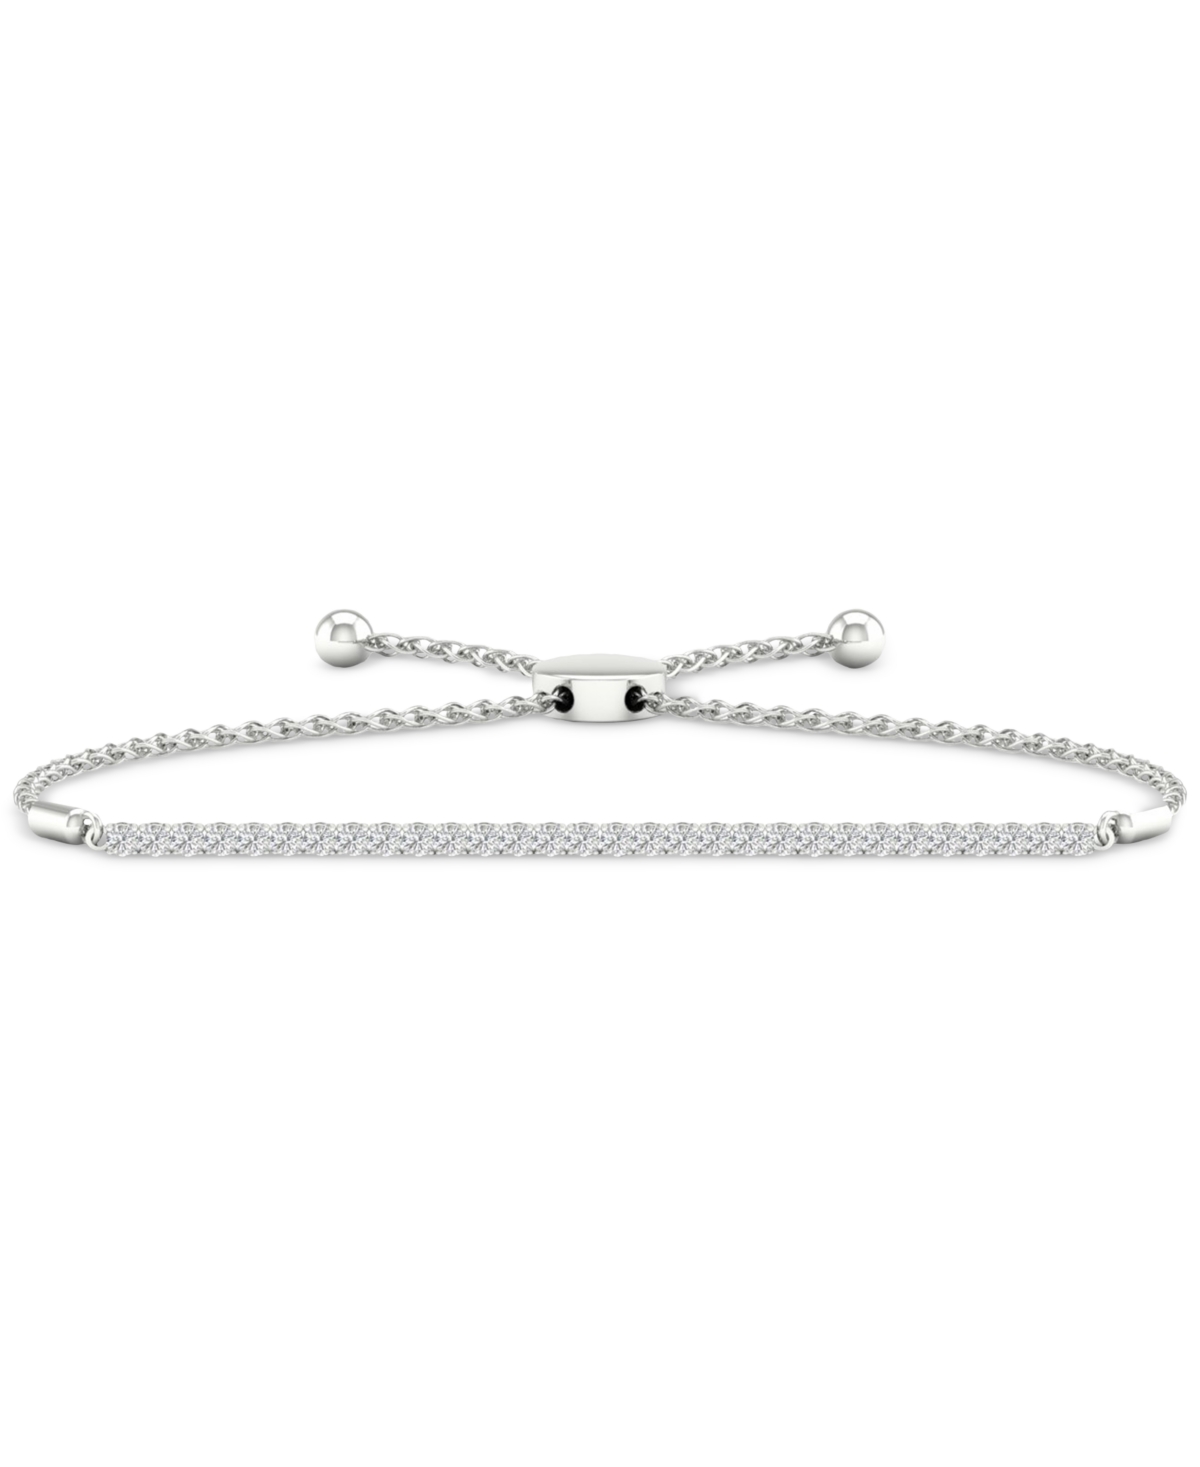 Lab Created Diamond Slider Bracelet (1ct. t.w.) in Rhodium-Plated Sterling Silver - Sterling Silver